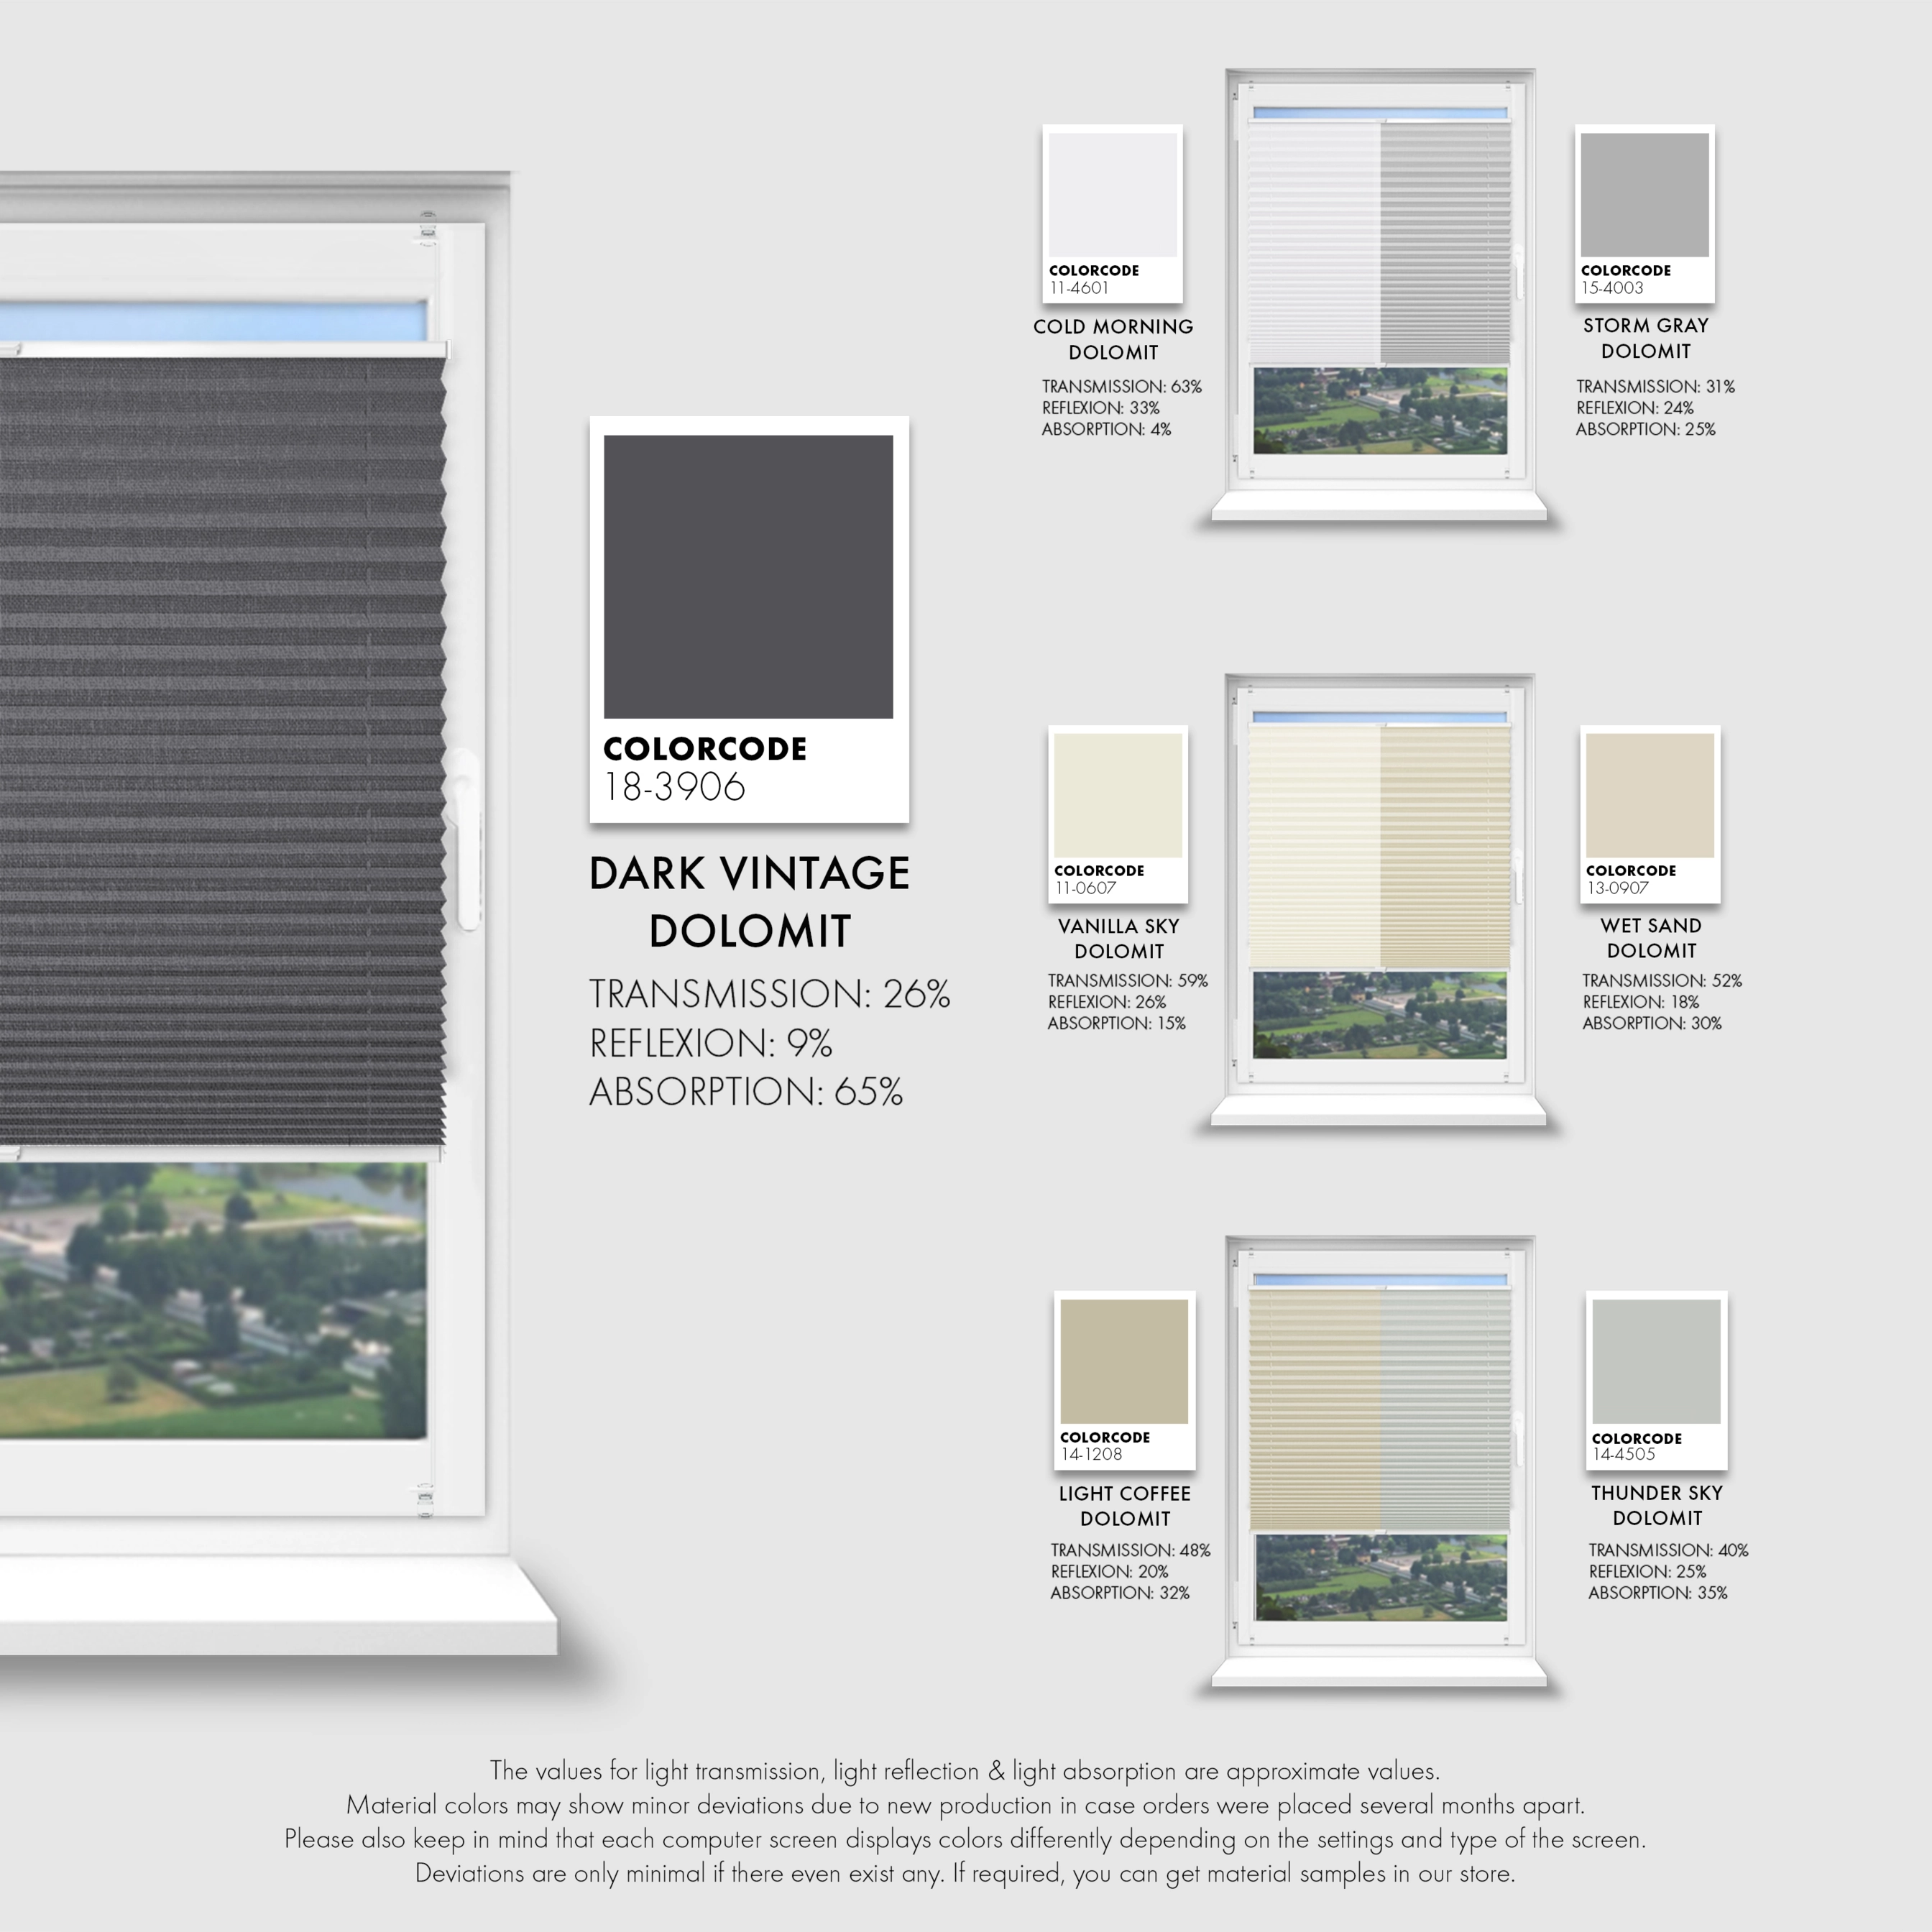 Schuette® Pleated Blind Made to Measure without Drilling • Dolomite Collection: Storm Gray (Grey) • Profile Colour: White